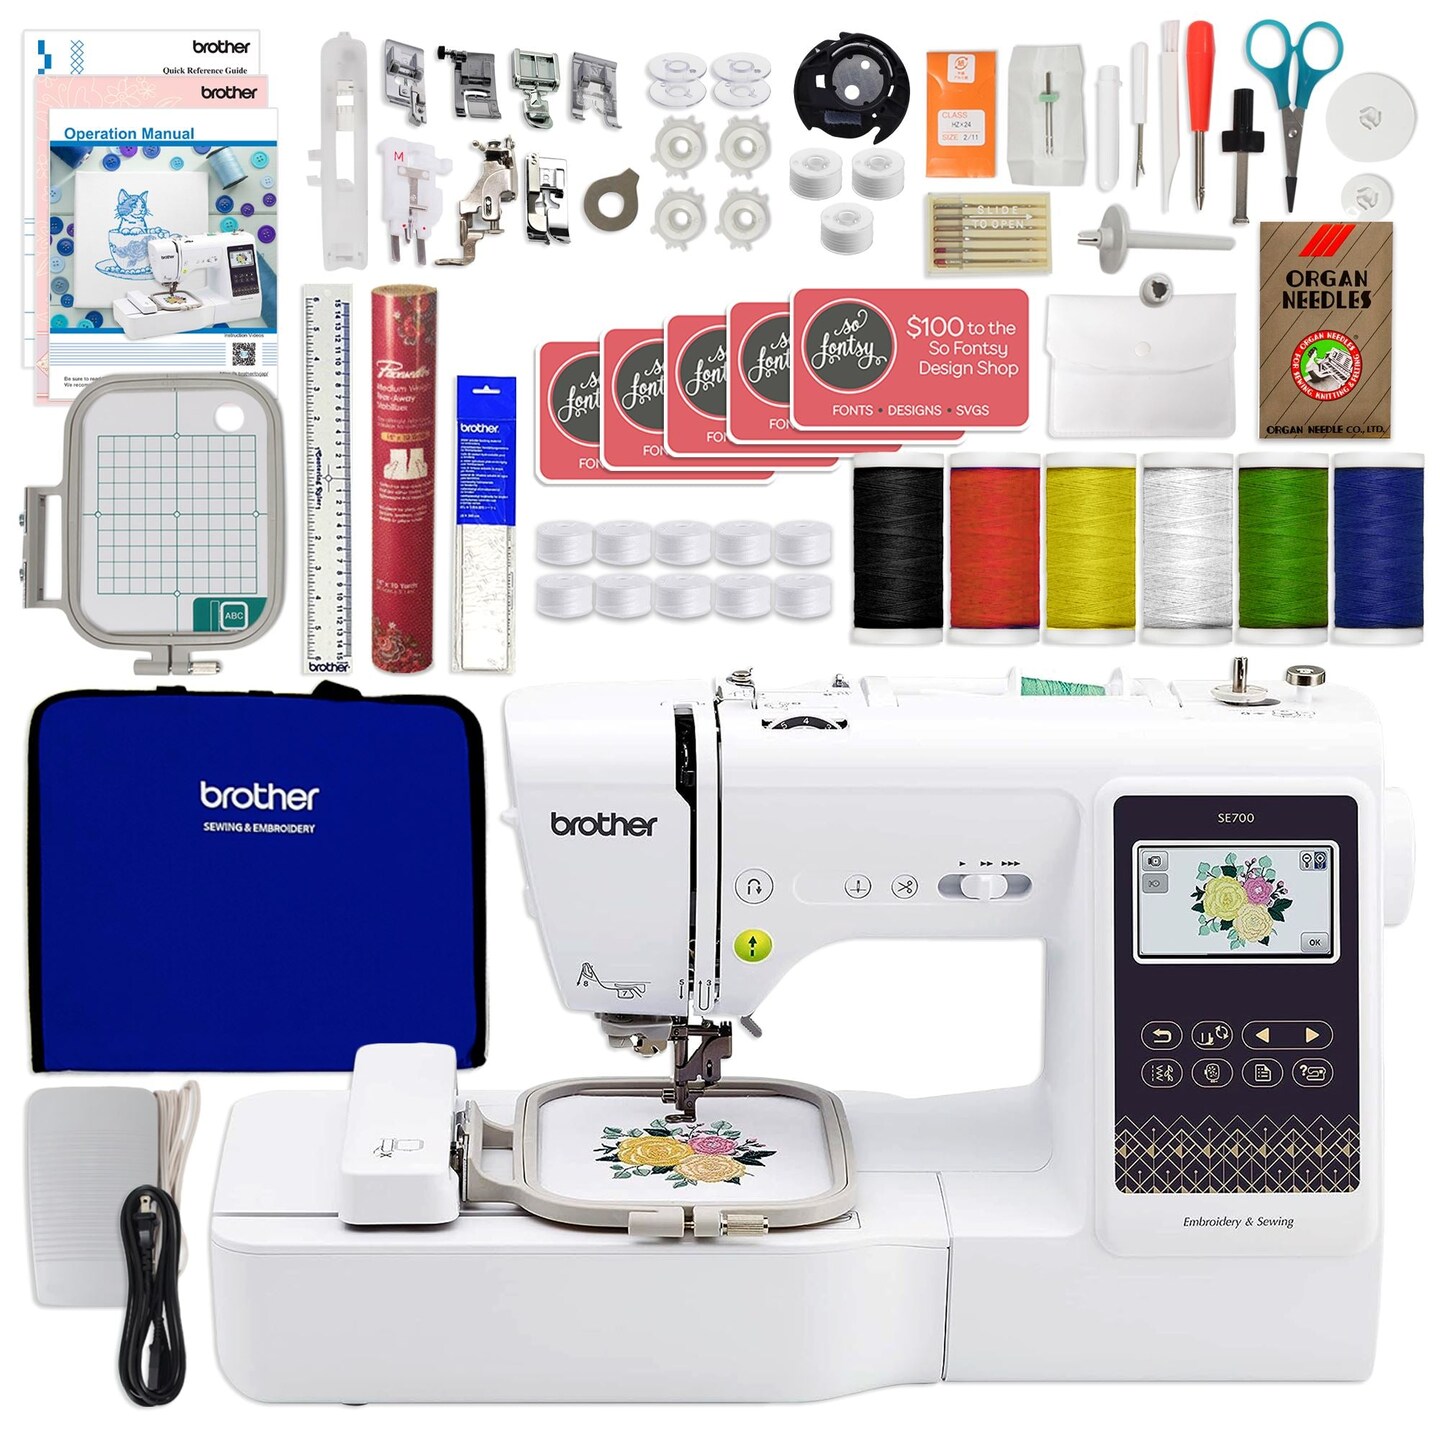 Brother SE625 Embroidering/Sewing Machine w/ accessories and